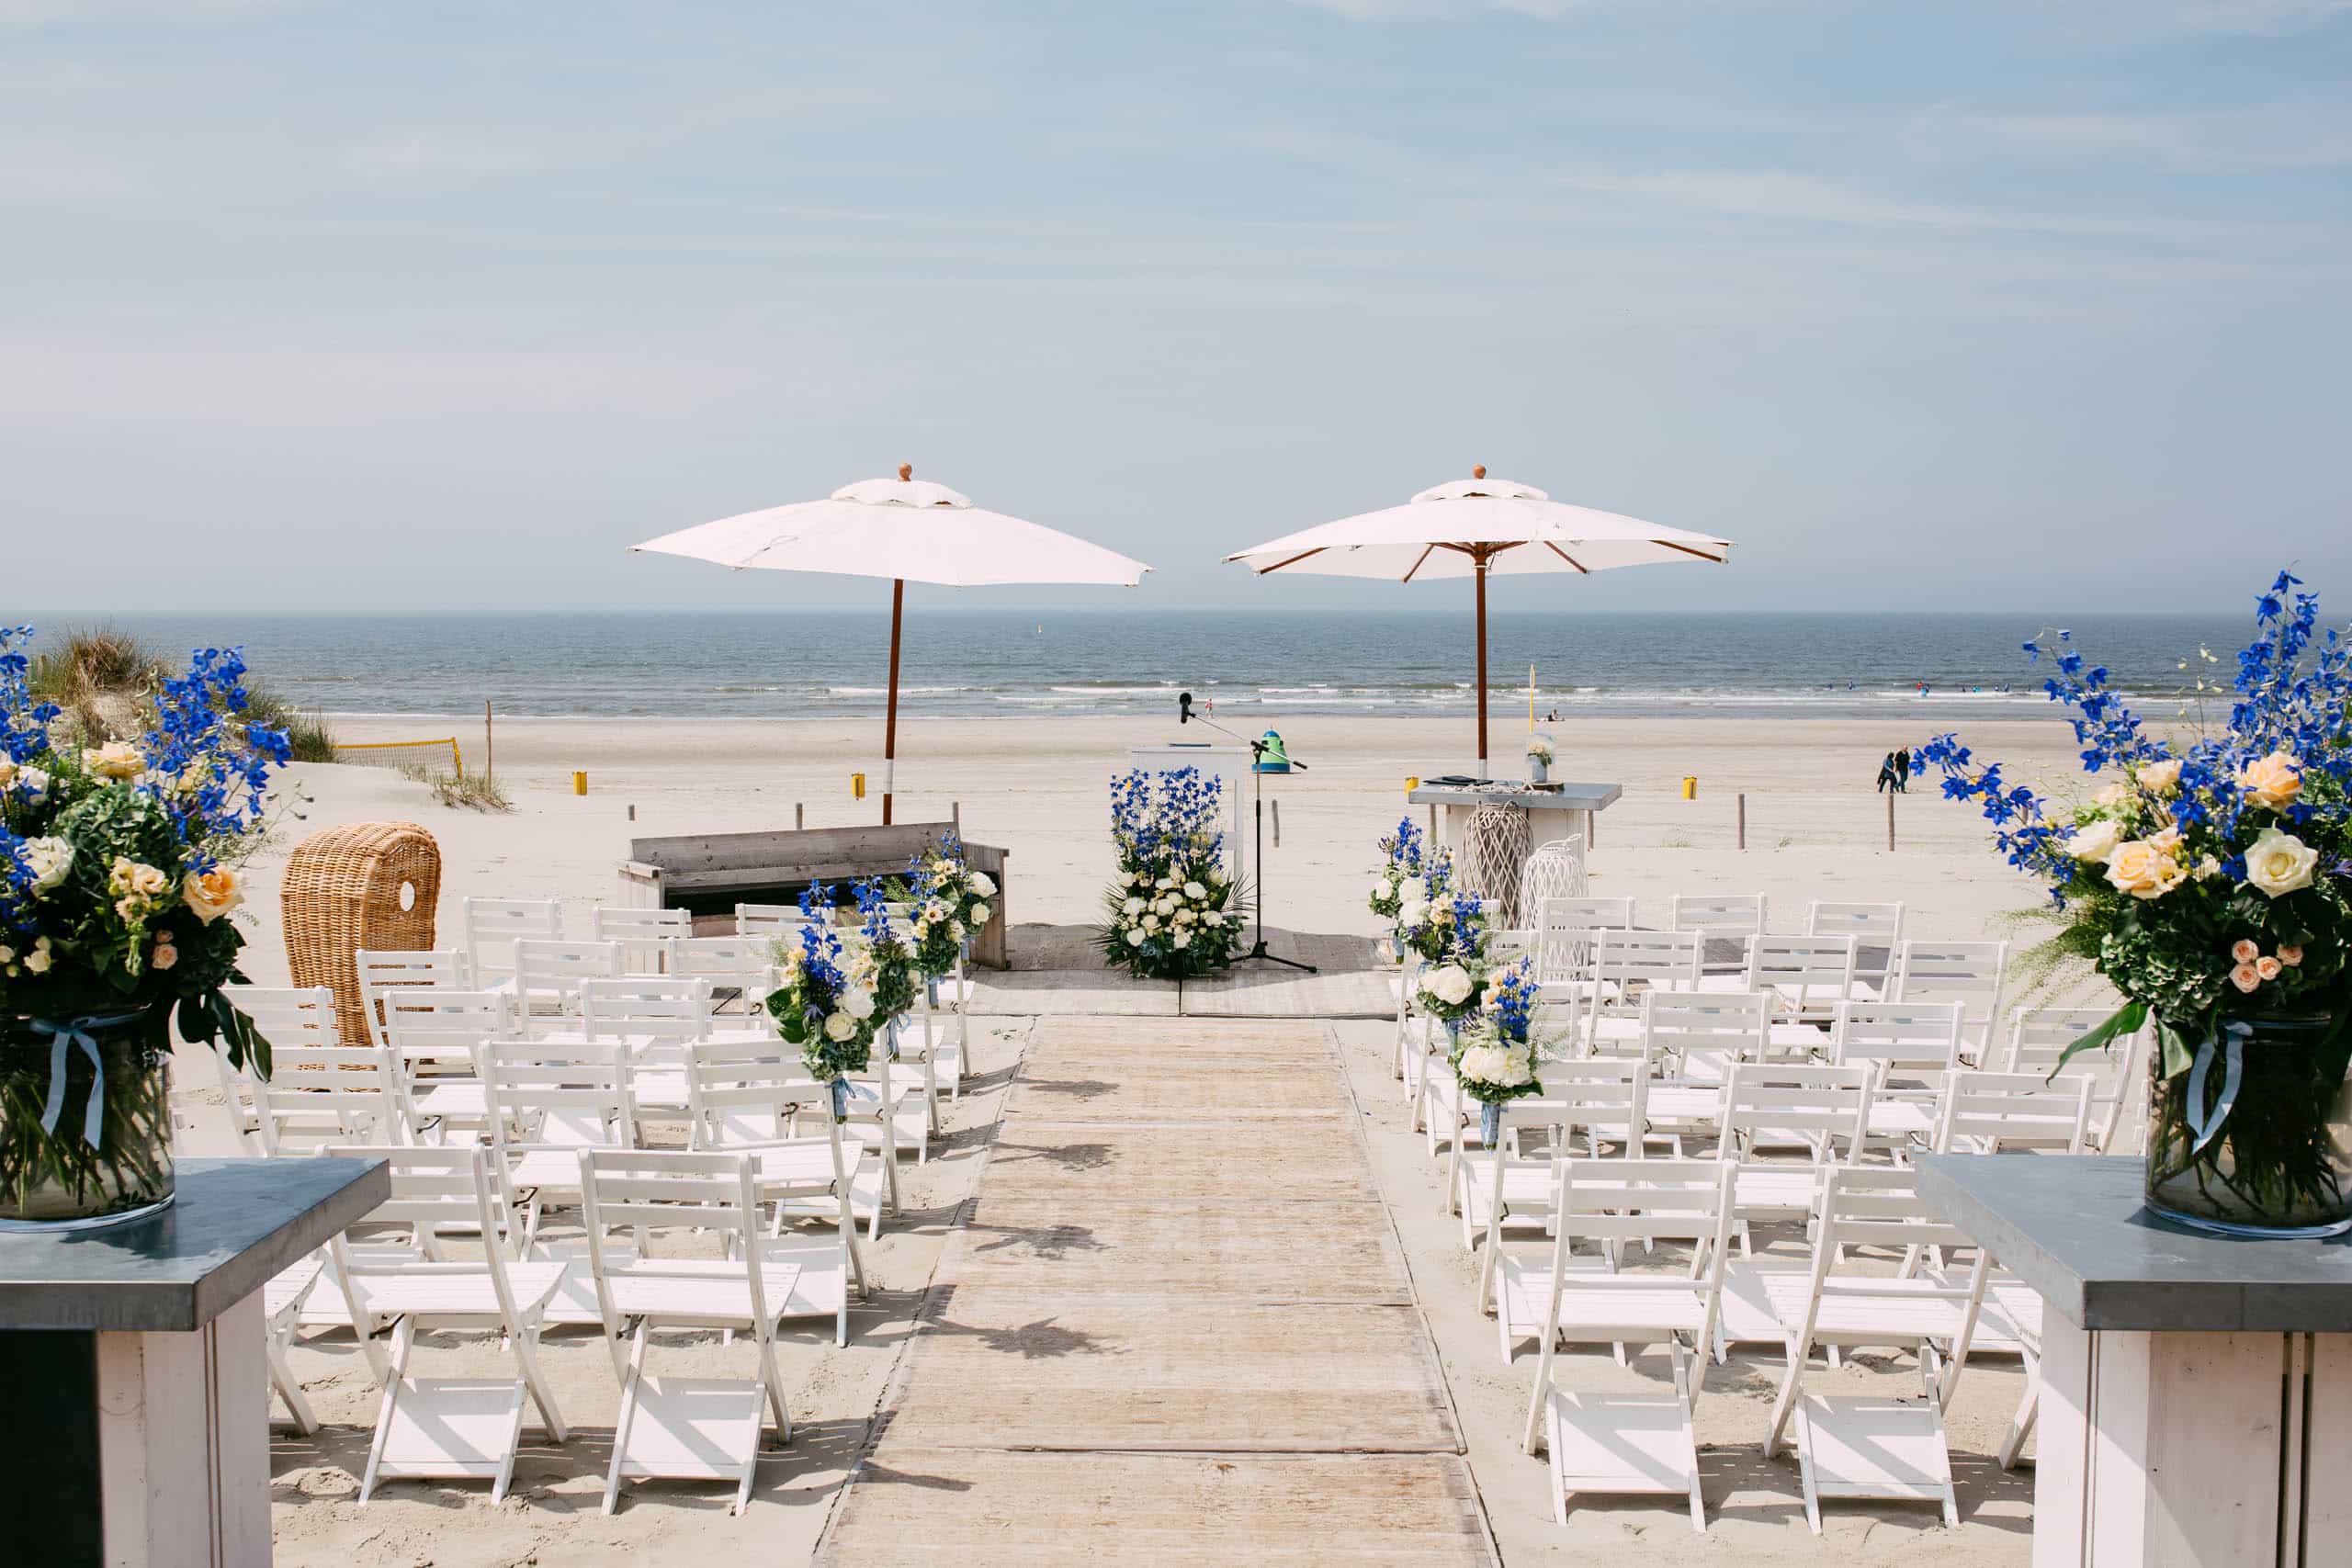 A wedding on the beach with chairs and umbrellas.